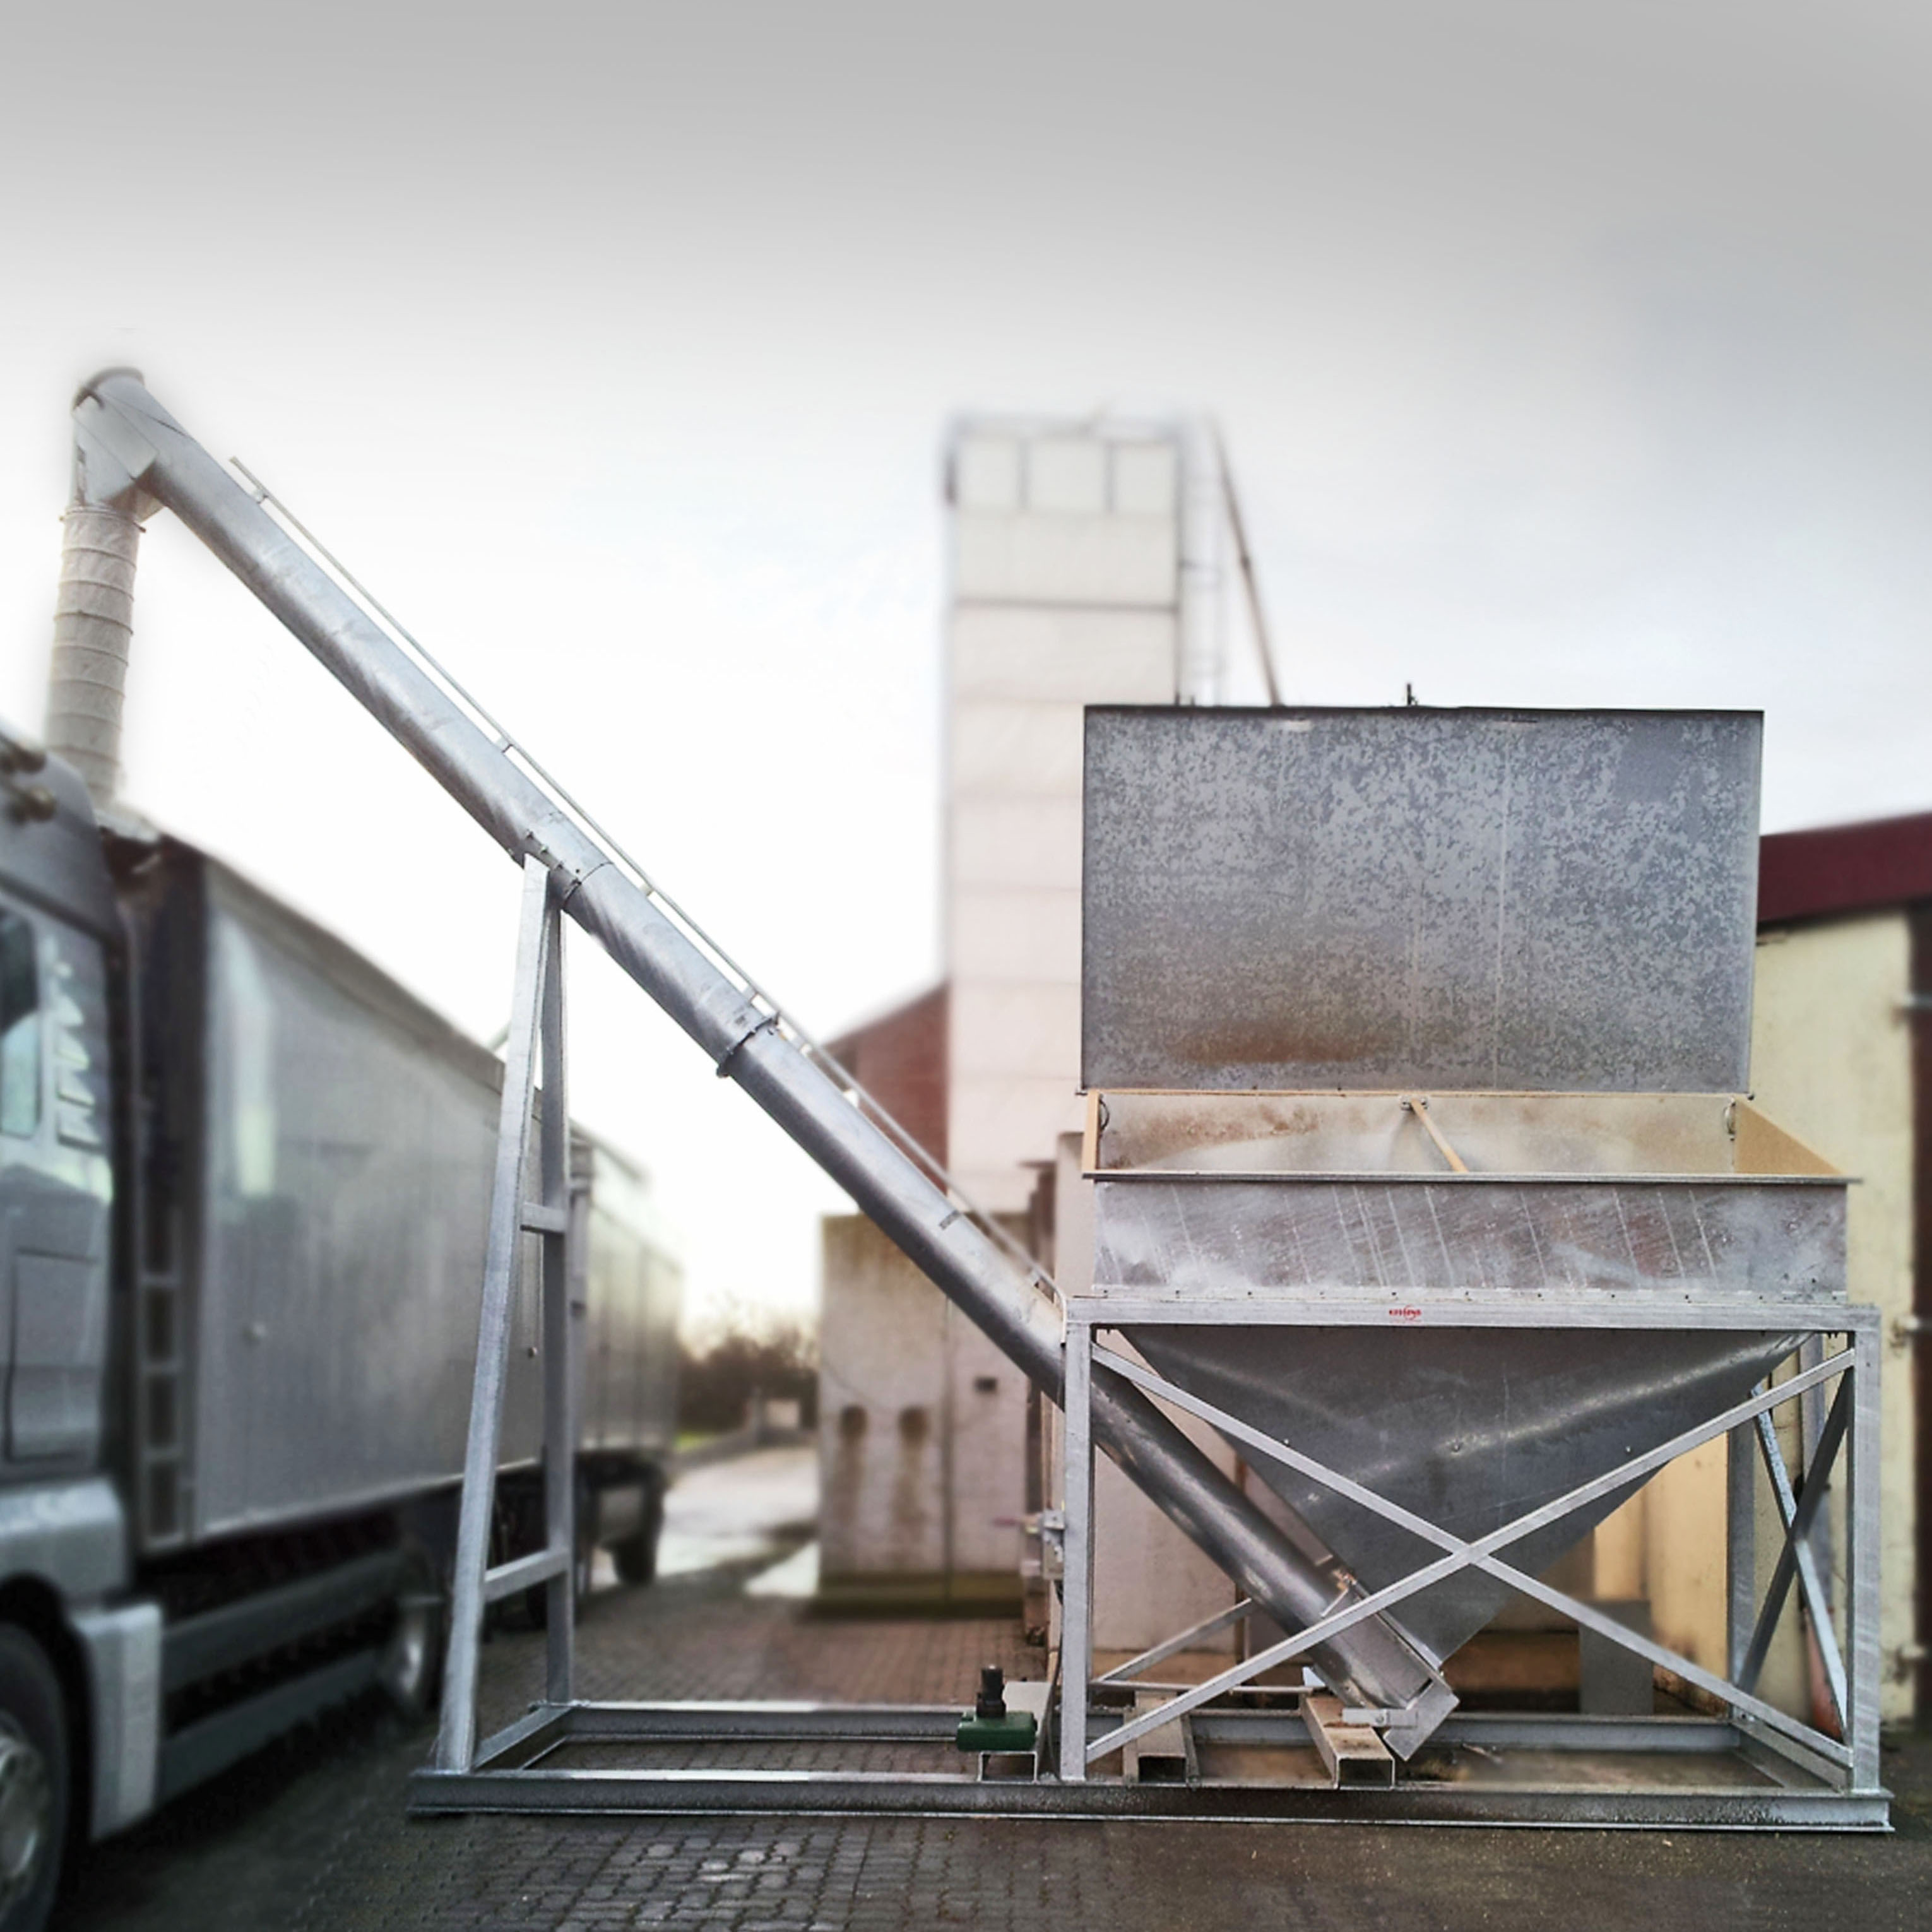 Mobile loading station Ø300 mm with buffer tank made of galvanized steel 